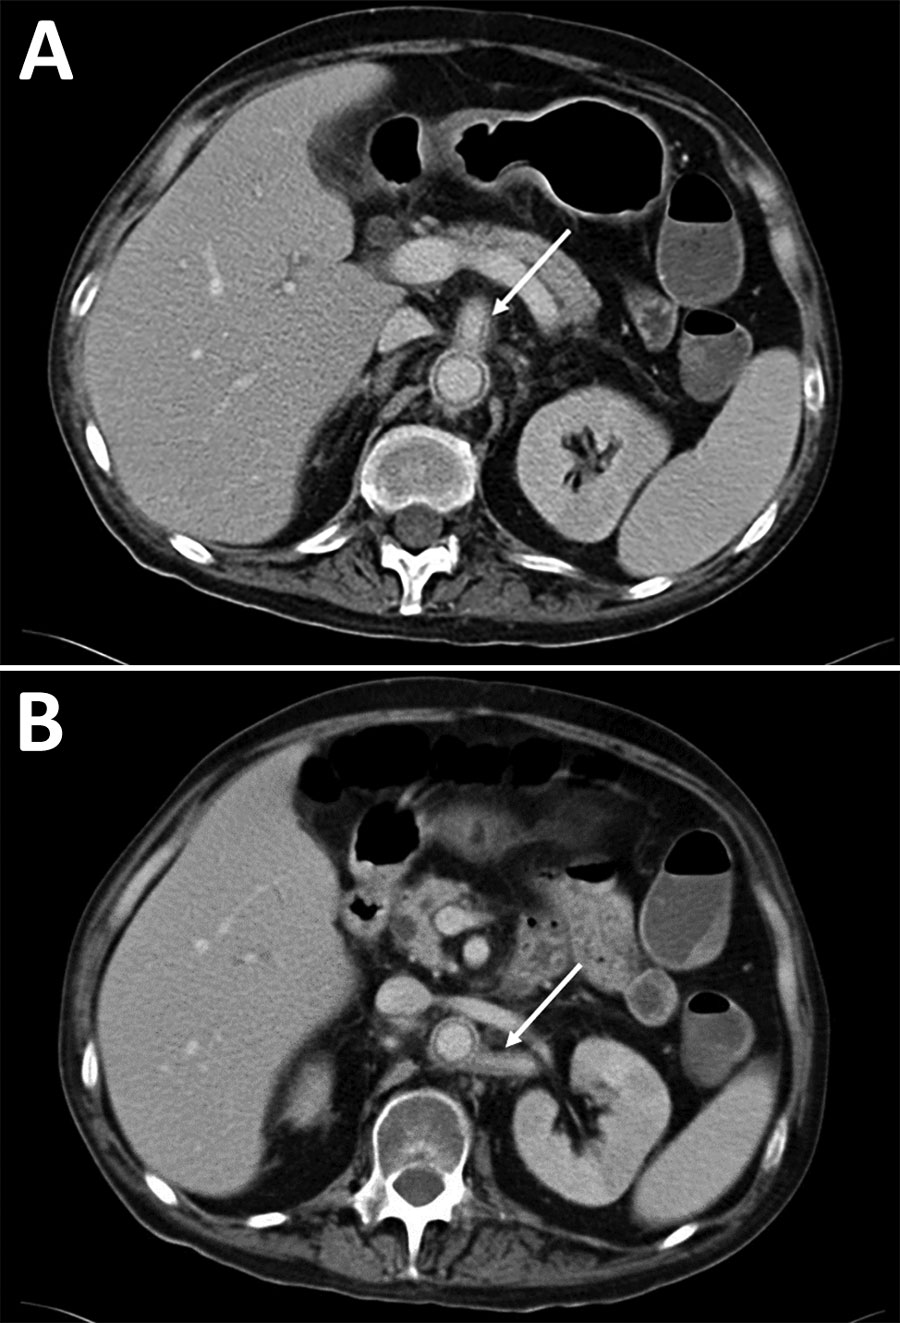 Abdominal computed tomography scans for case-patient 5 showing aortitis in study of unexpected vascular locations of Scedosporium spp. and Lomentospora prolificans fungal infections, France. A) Arrow indicates abdominal aorta and superior mesenteric artery thickening and perivascular contrast. B) Arrow indicates abdominal aorta and left renal artery thickening and perivascular contrast. Data are from the Scedosporiosis/lomentosporiosis Observational Study (12).